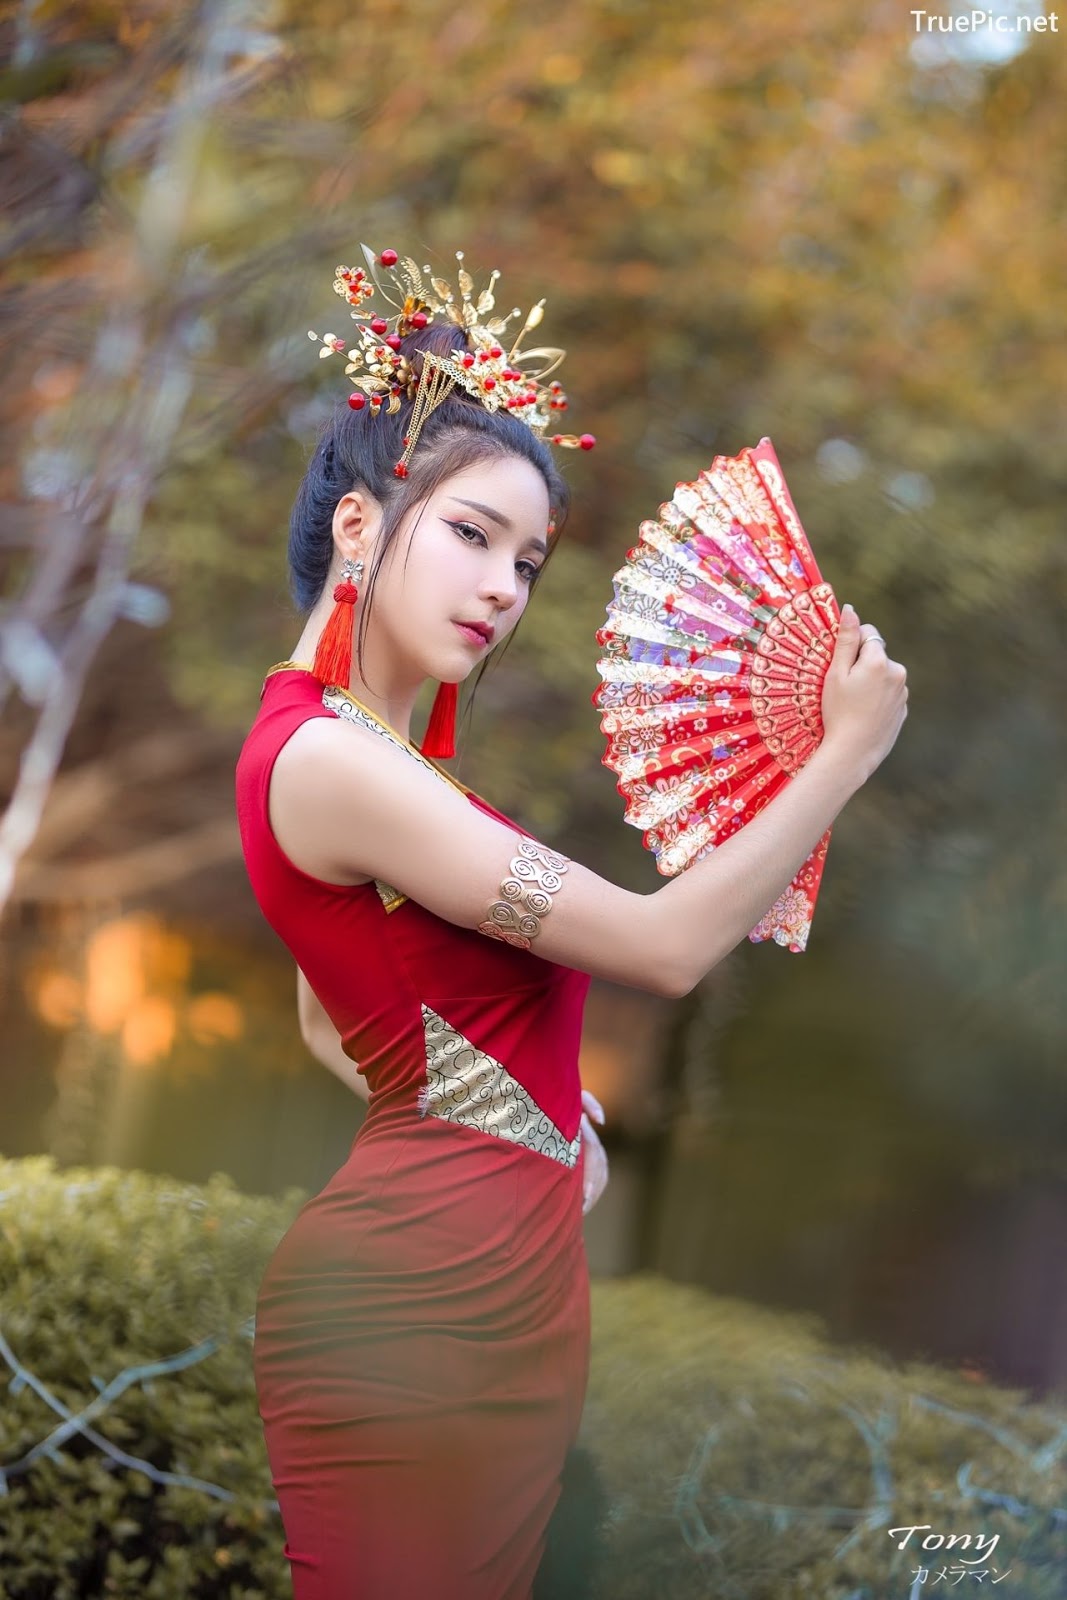 Image-Thailand-Hot-Model-Janet-Kanokwan-Saesim-Sexy-Chinese-Girl-Red-Dress-Traditional-TruePic.net- Picture-31